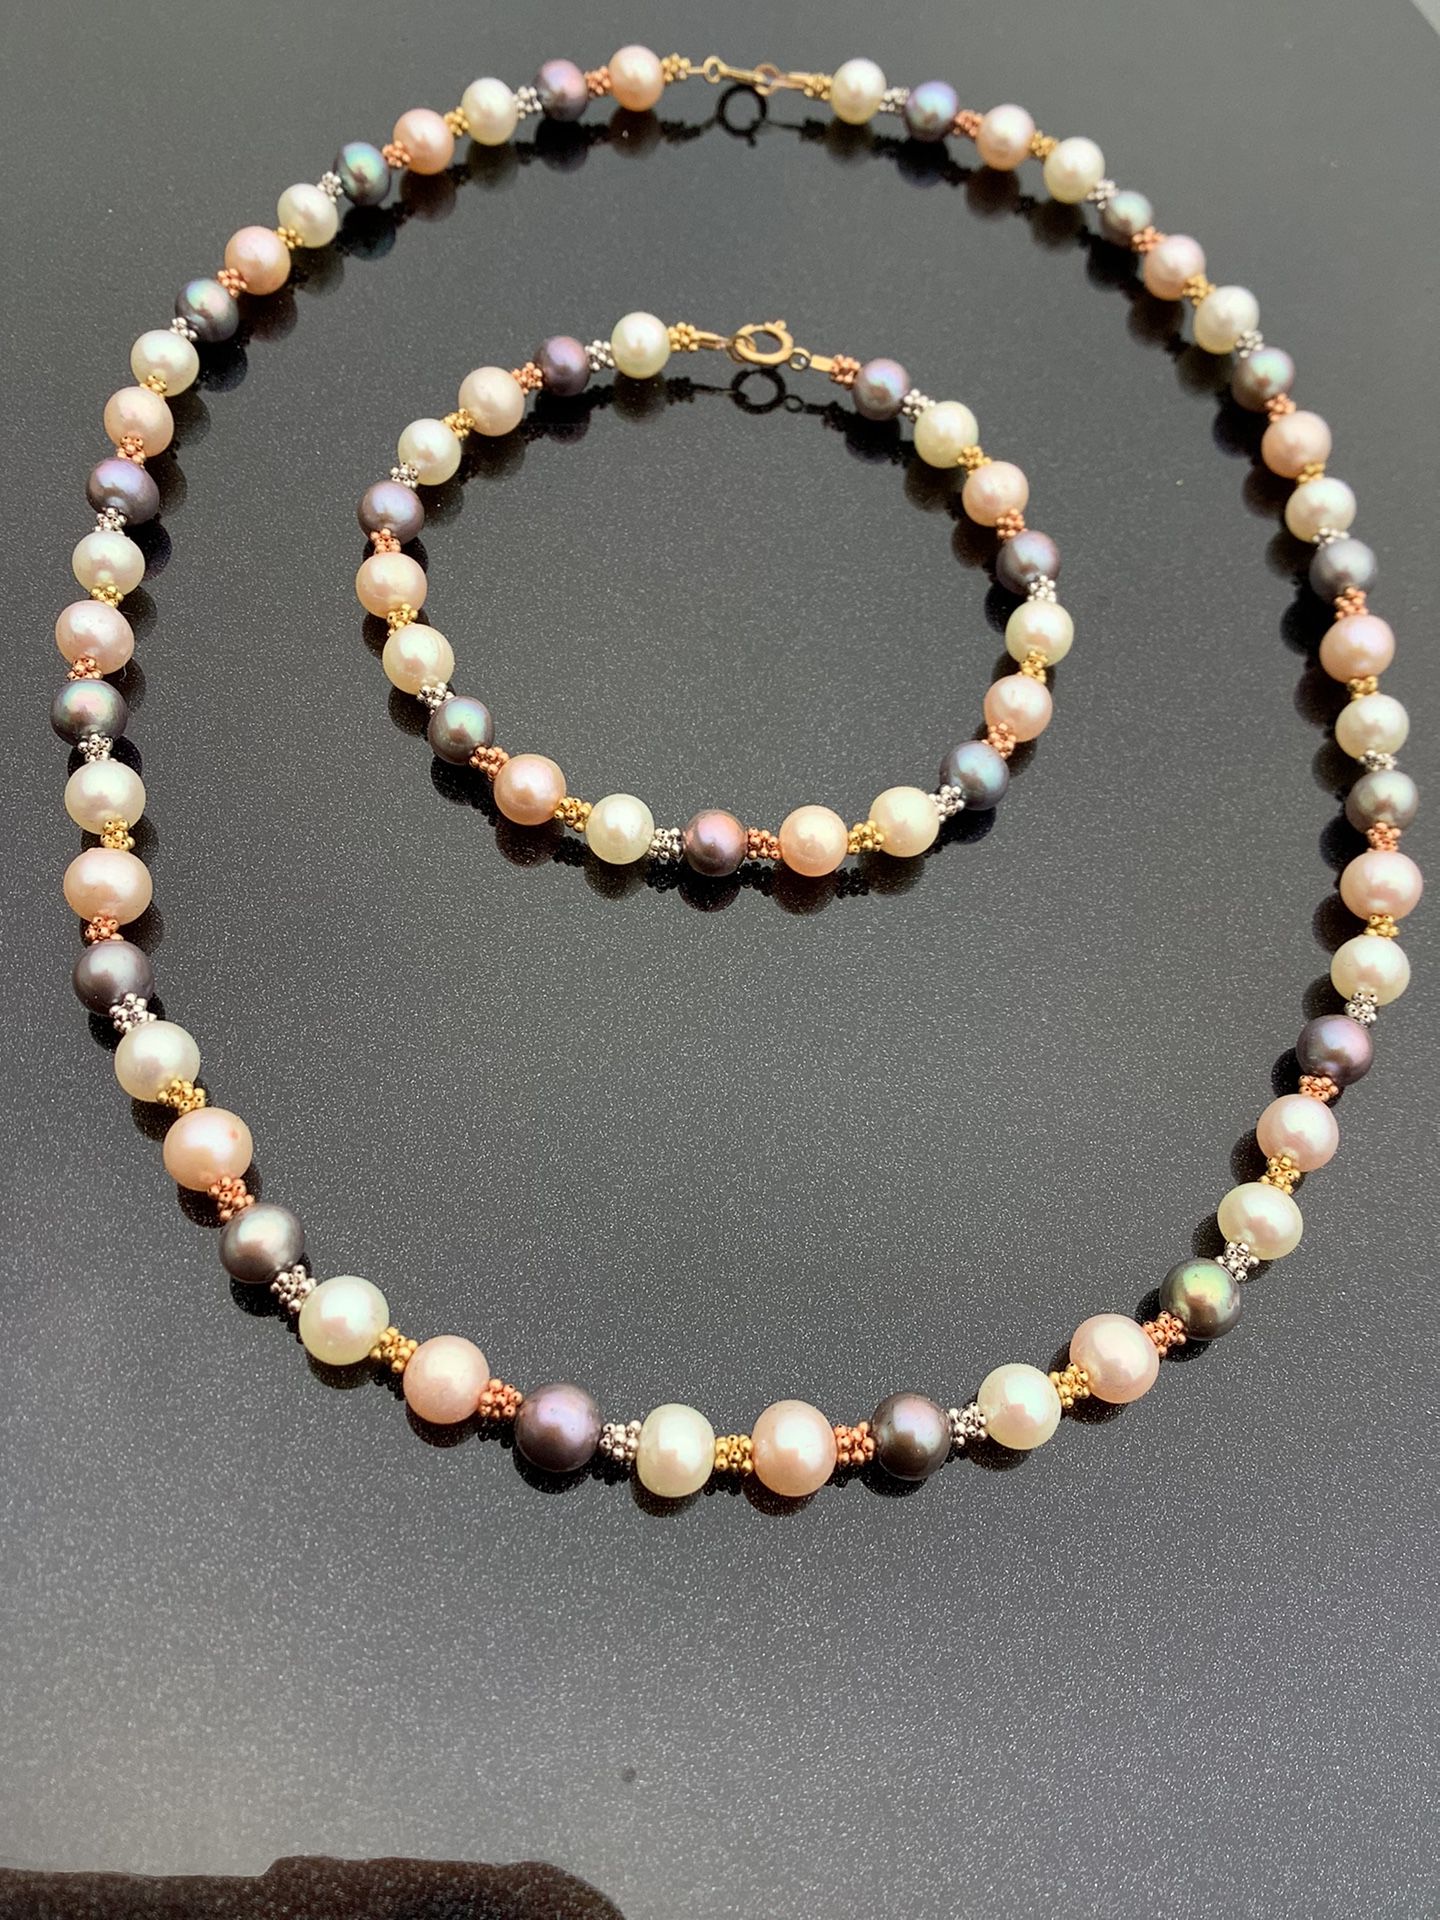 Beautiful Tri-Colored Pearl Necklace With Matching Bracelet